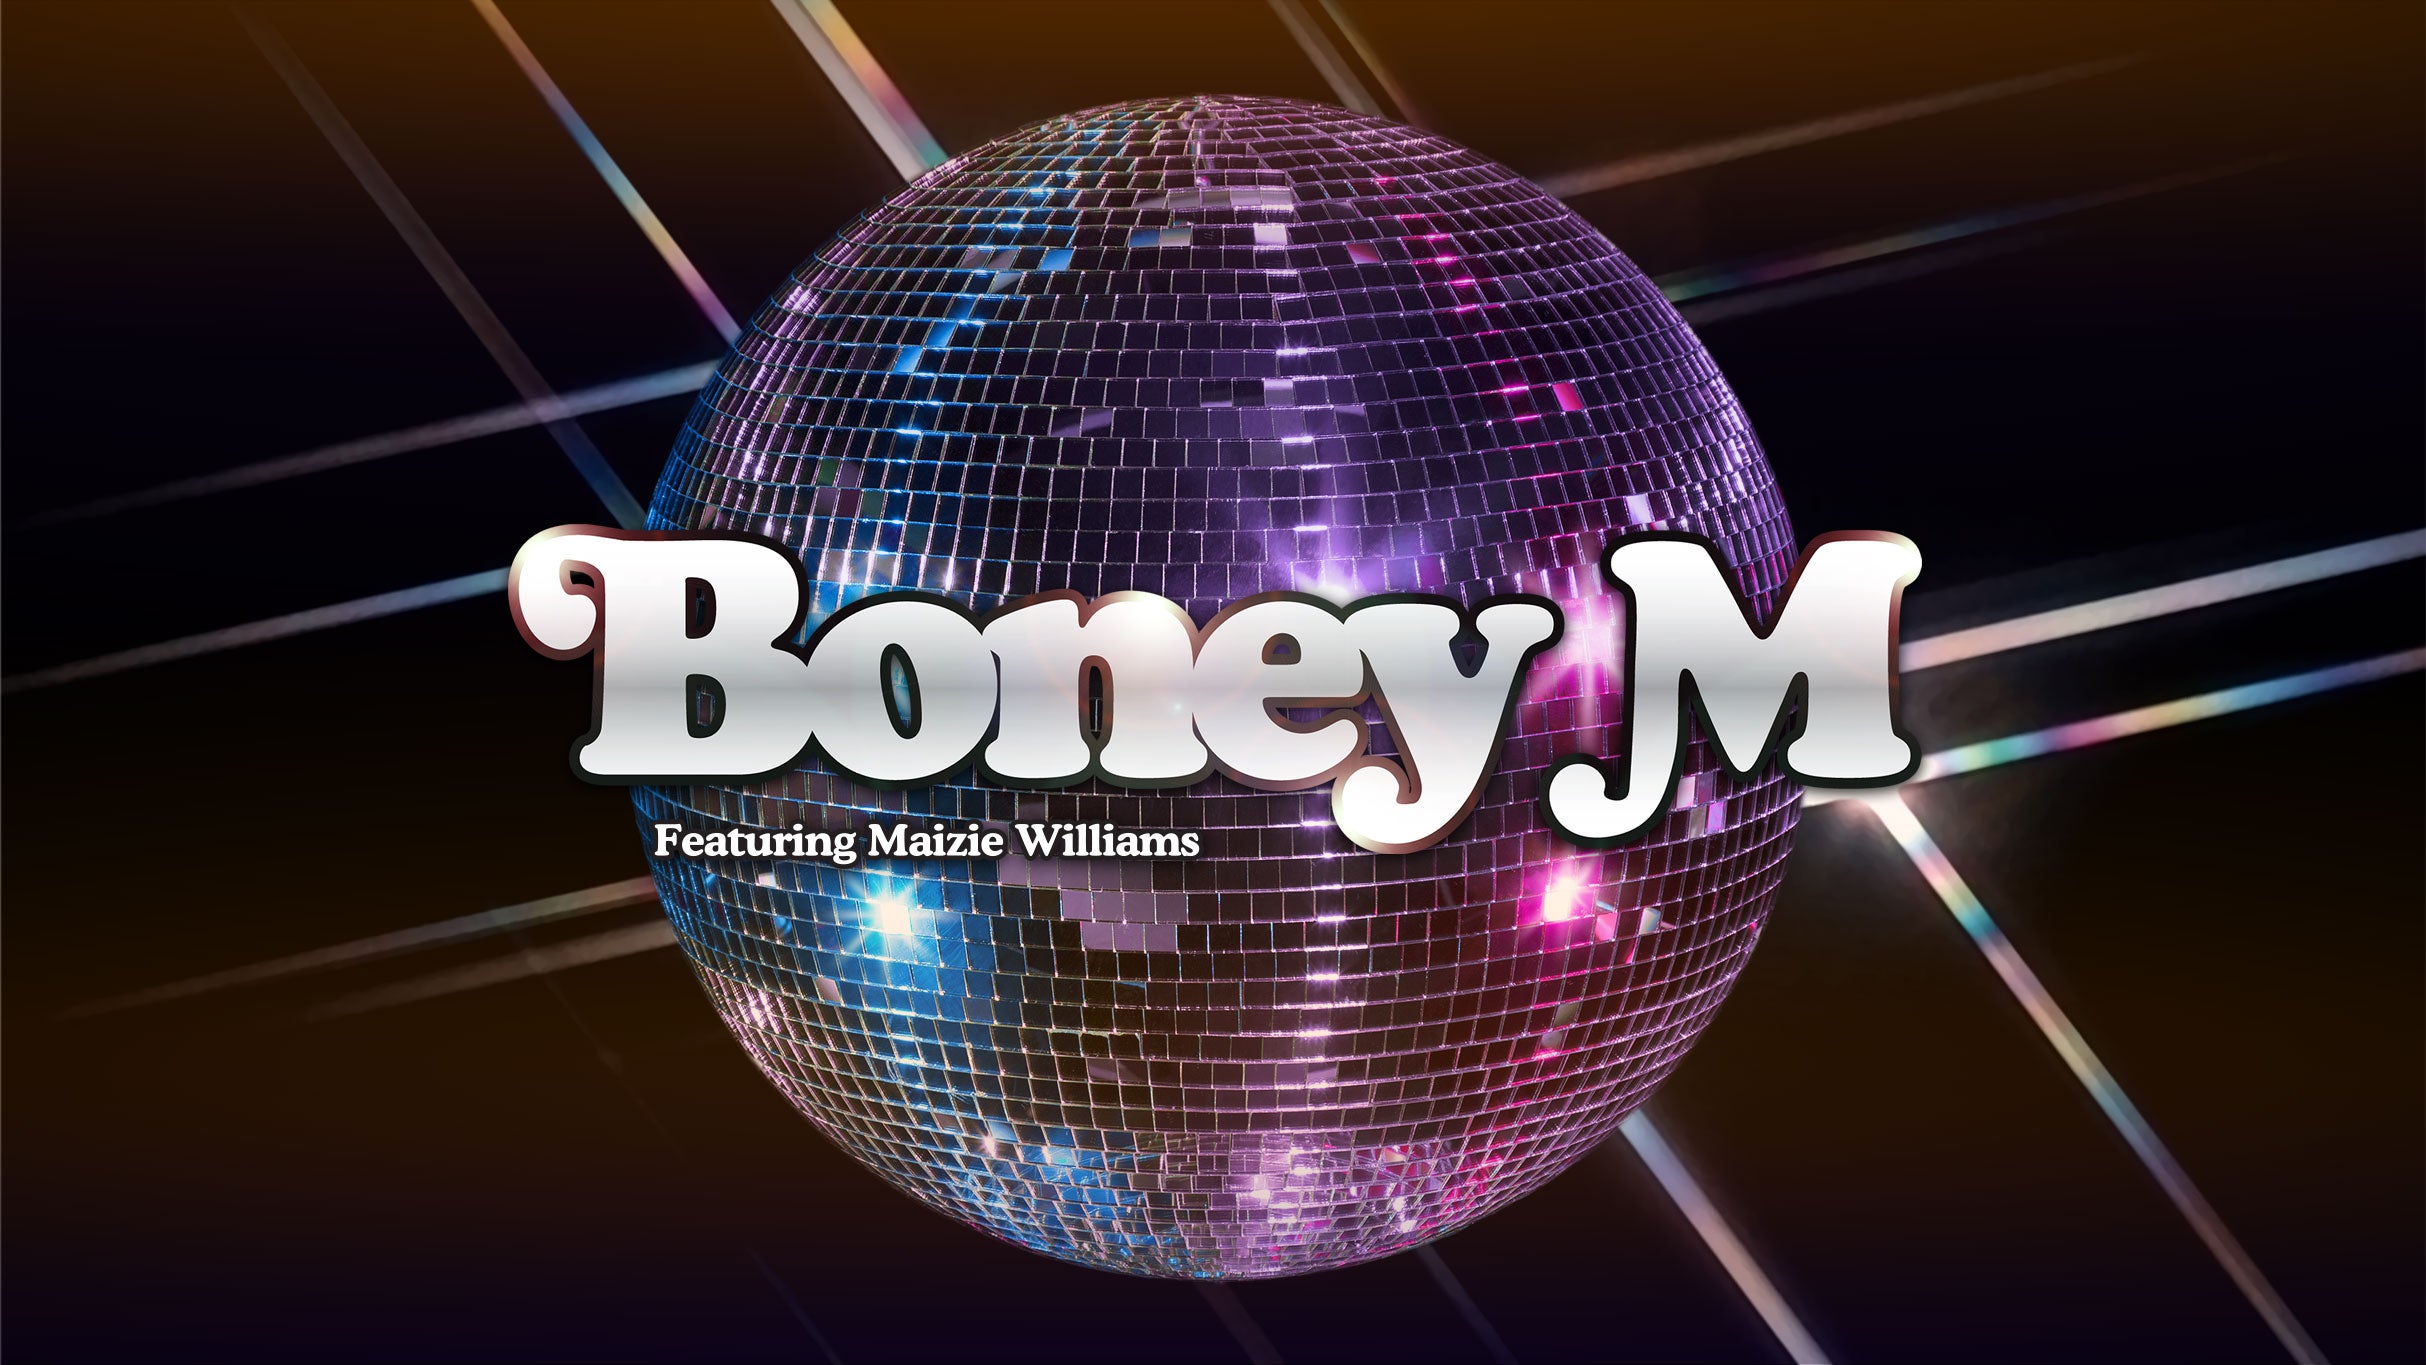 Image used with permission from Ticketmaster | Boney M The Farewell Tour tickets